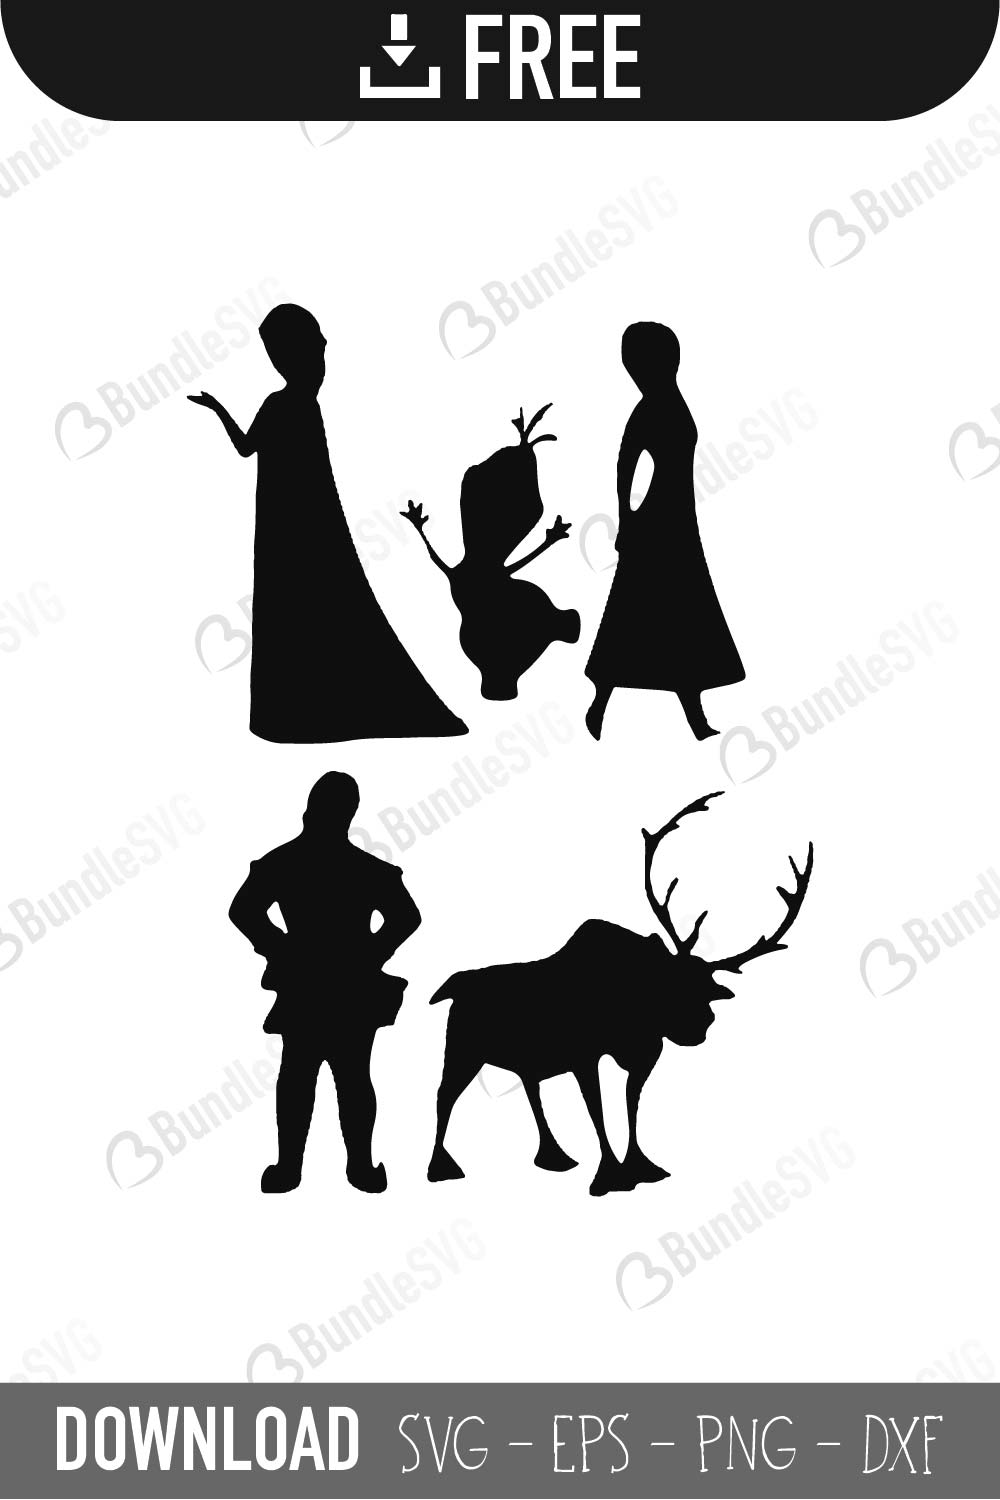 Download Art Collectibles Clip Art Jpg Pdf Cutting Files Bundle For Cricut Silhouette Printable Png Roblox Squad Goals Squadgoals Roblox Inspired Svg Eps